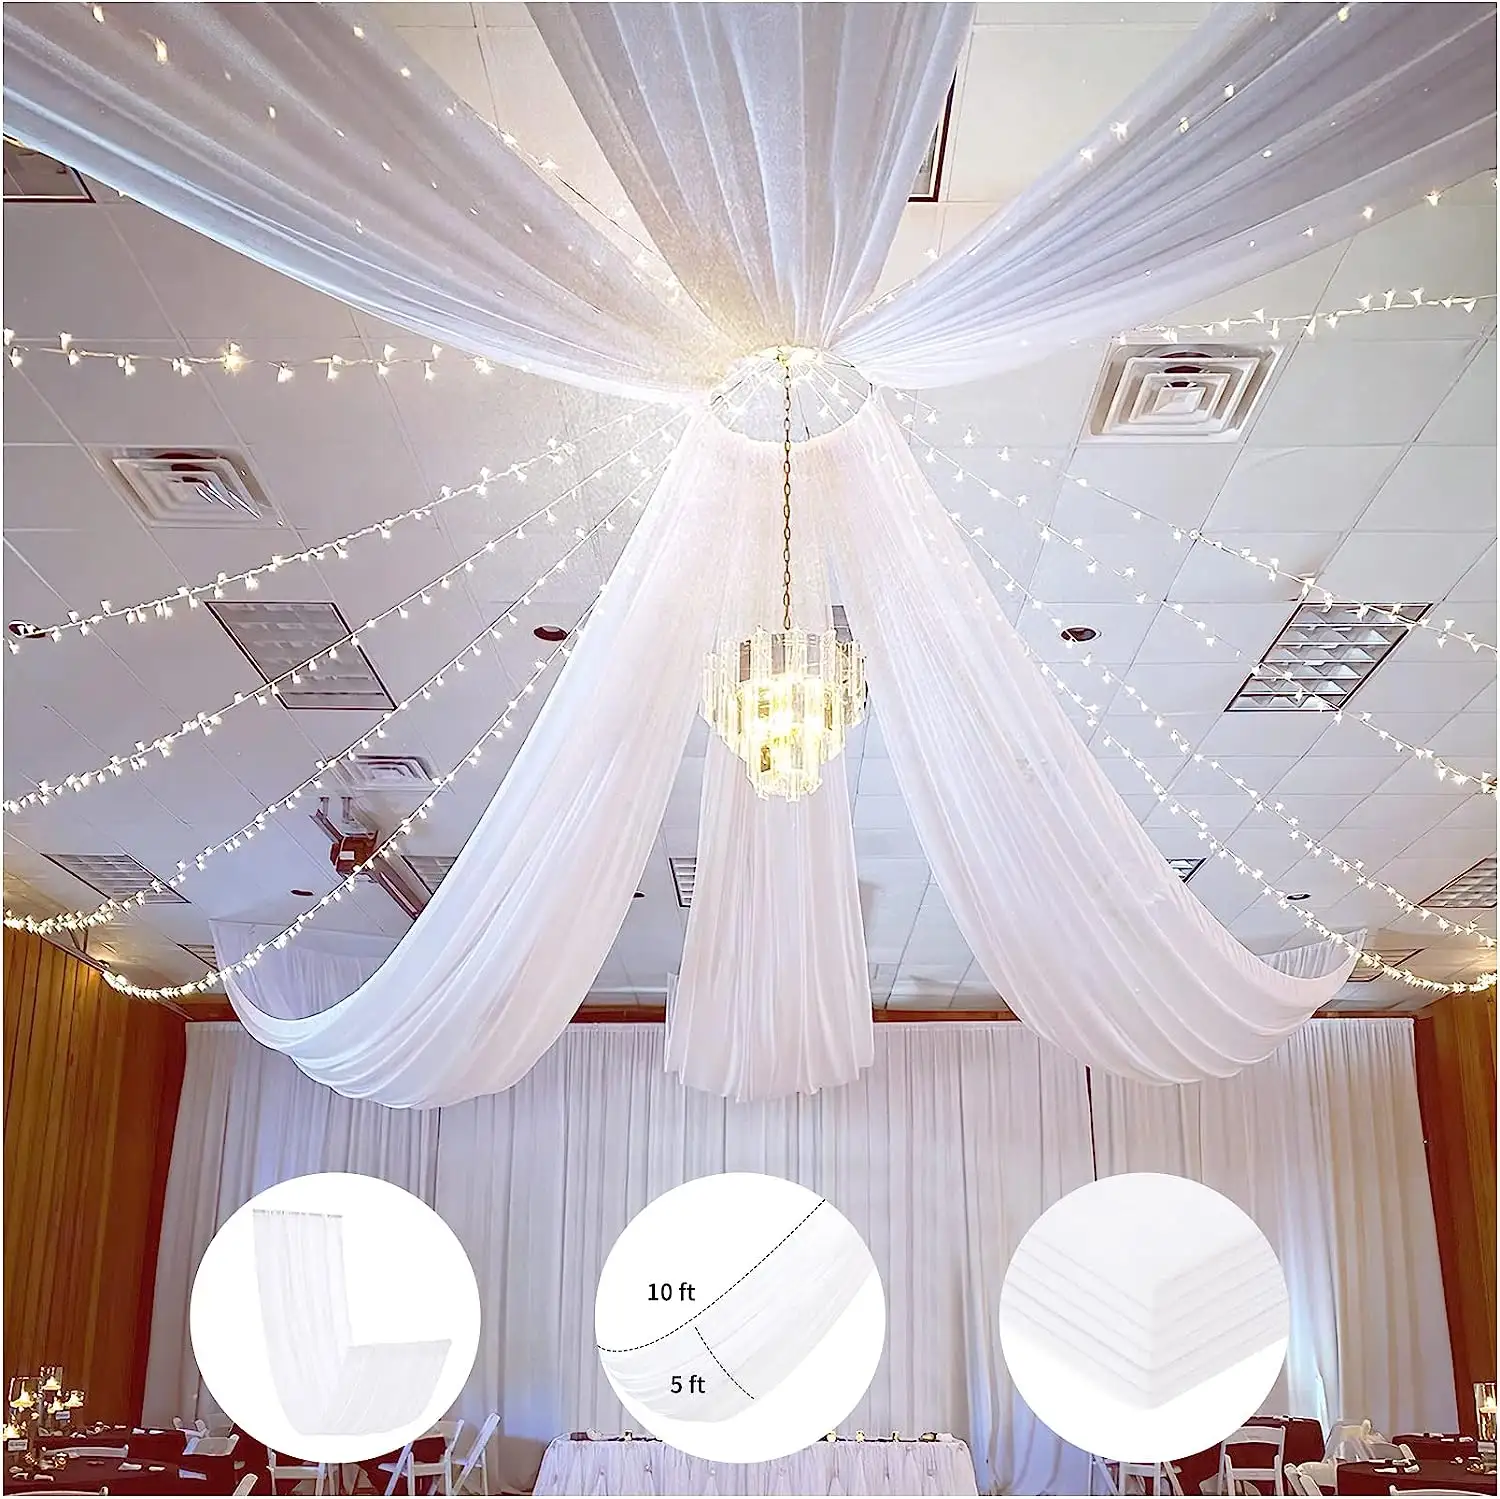 6 Panel Ceiling Chiffon Arch Draping Fabric Sheer Curtains for Party Ceremony Swag Wedding Decorations